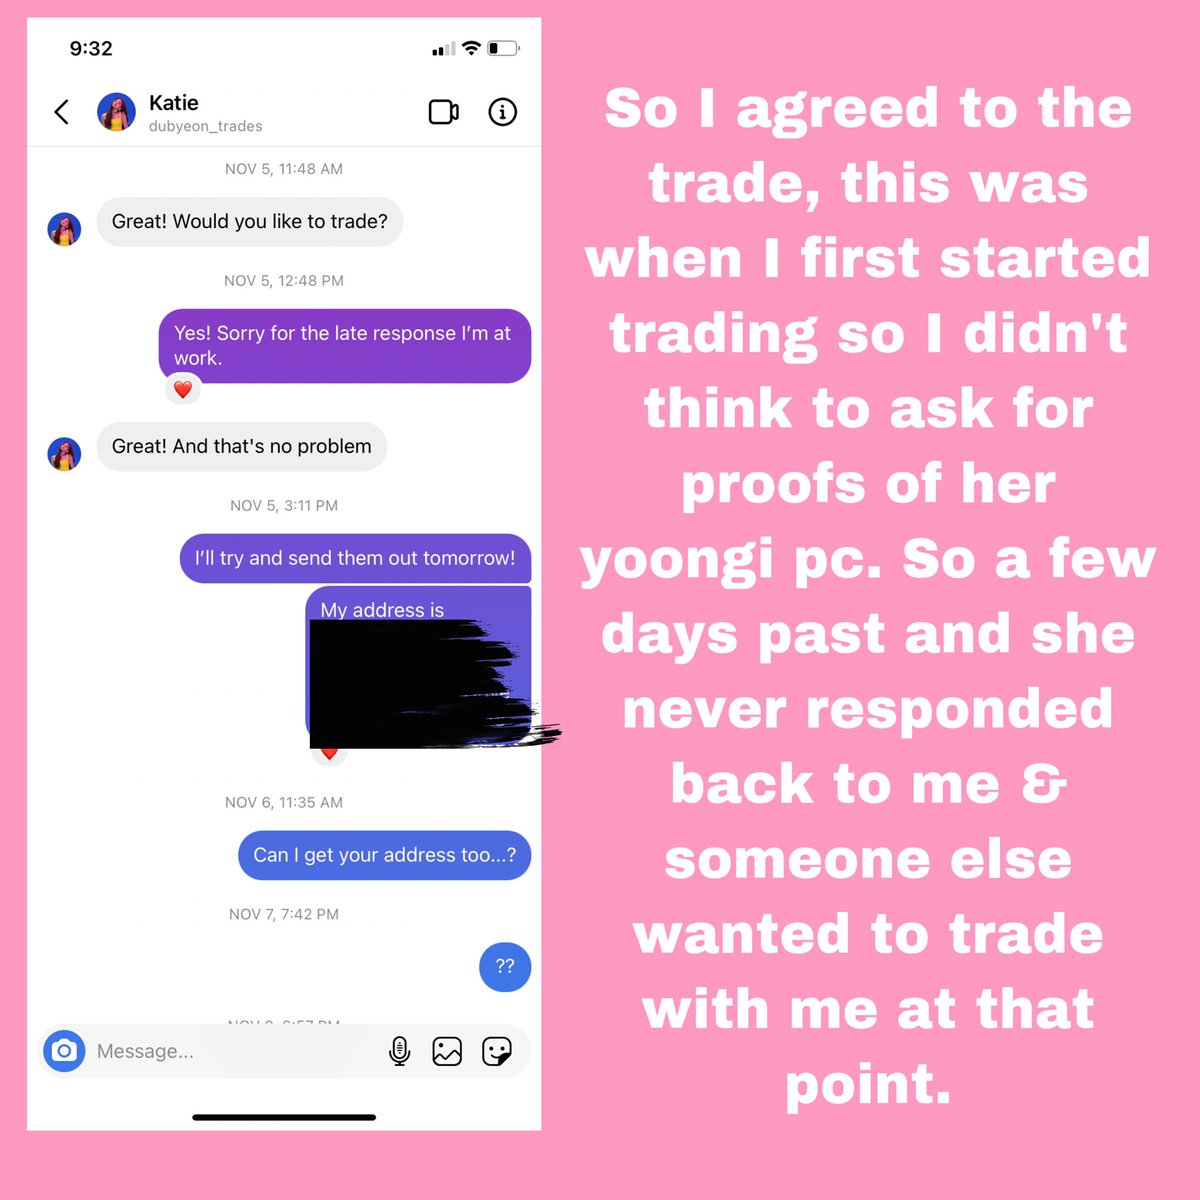 First she messaged me and this was when I first started to trade so you’ll see I never asked for her proofs because I kinda took her word for it